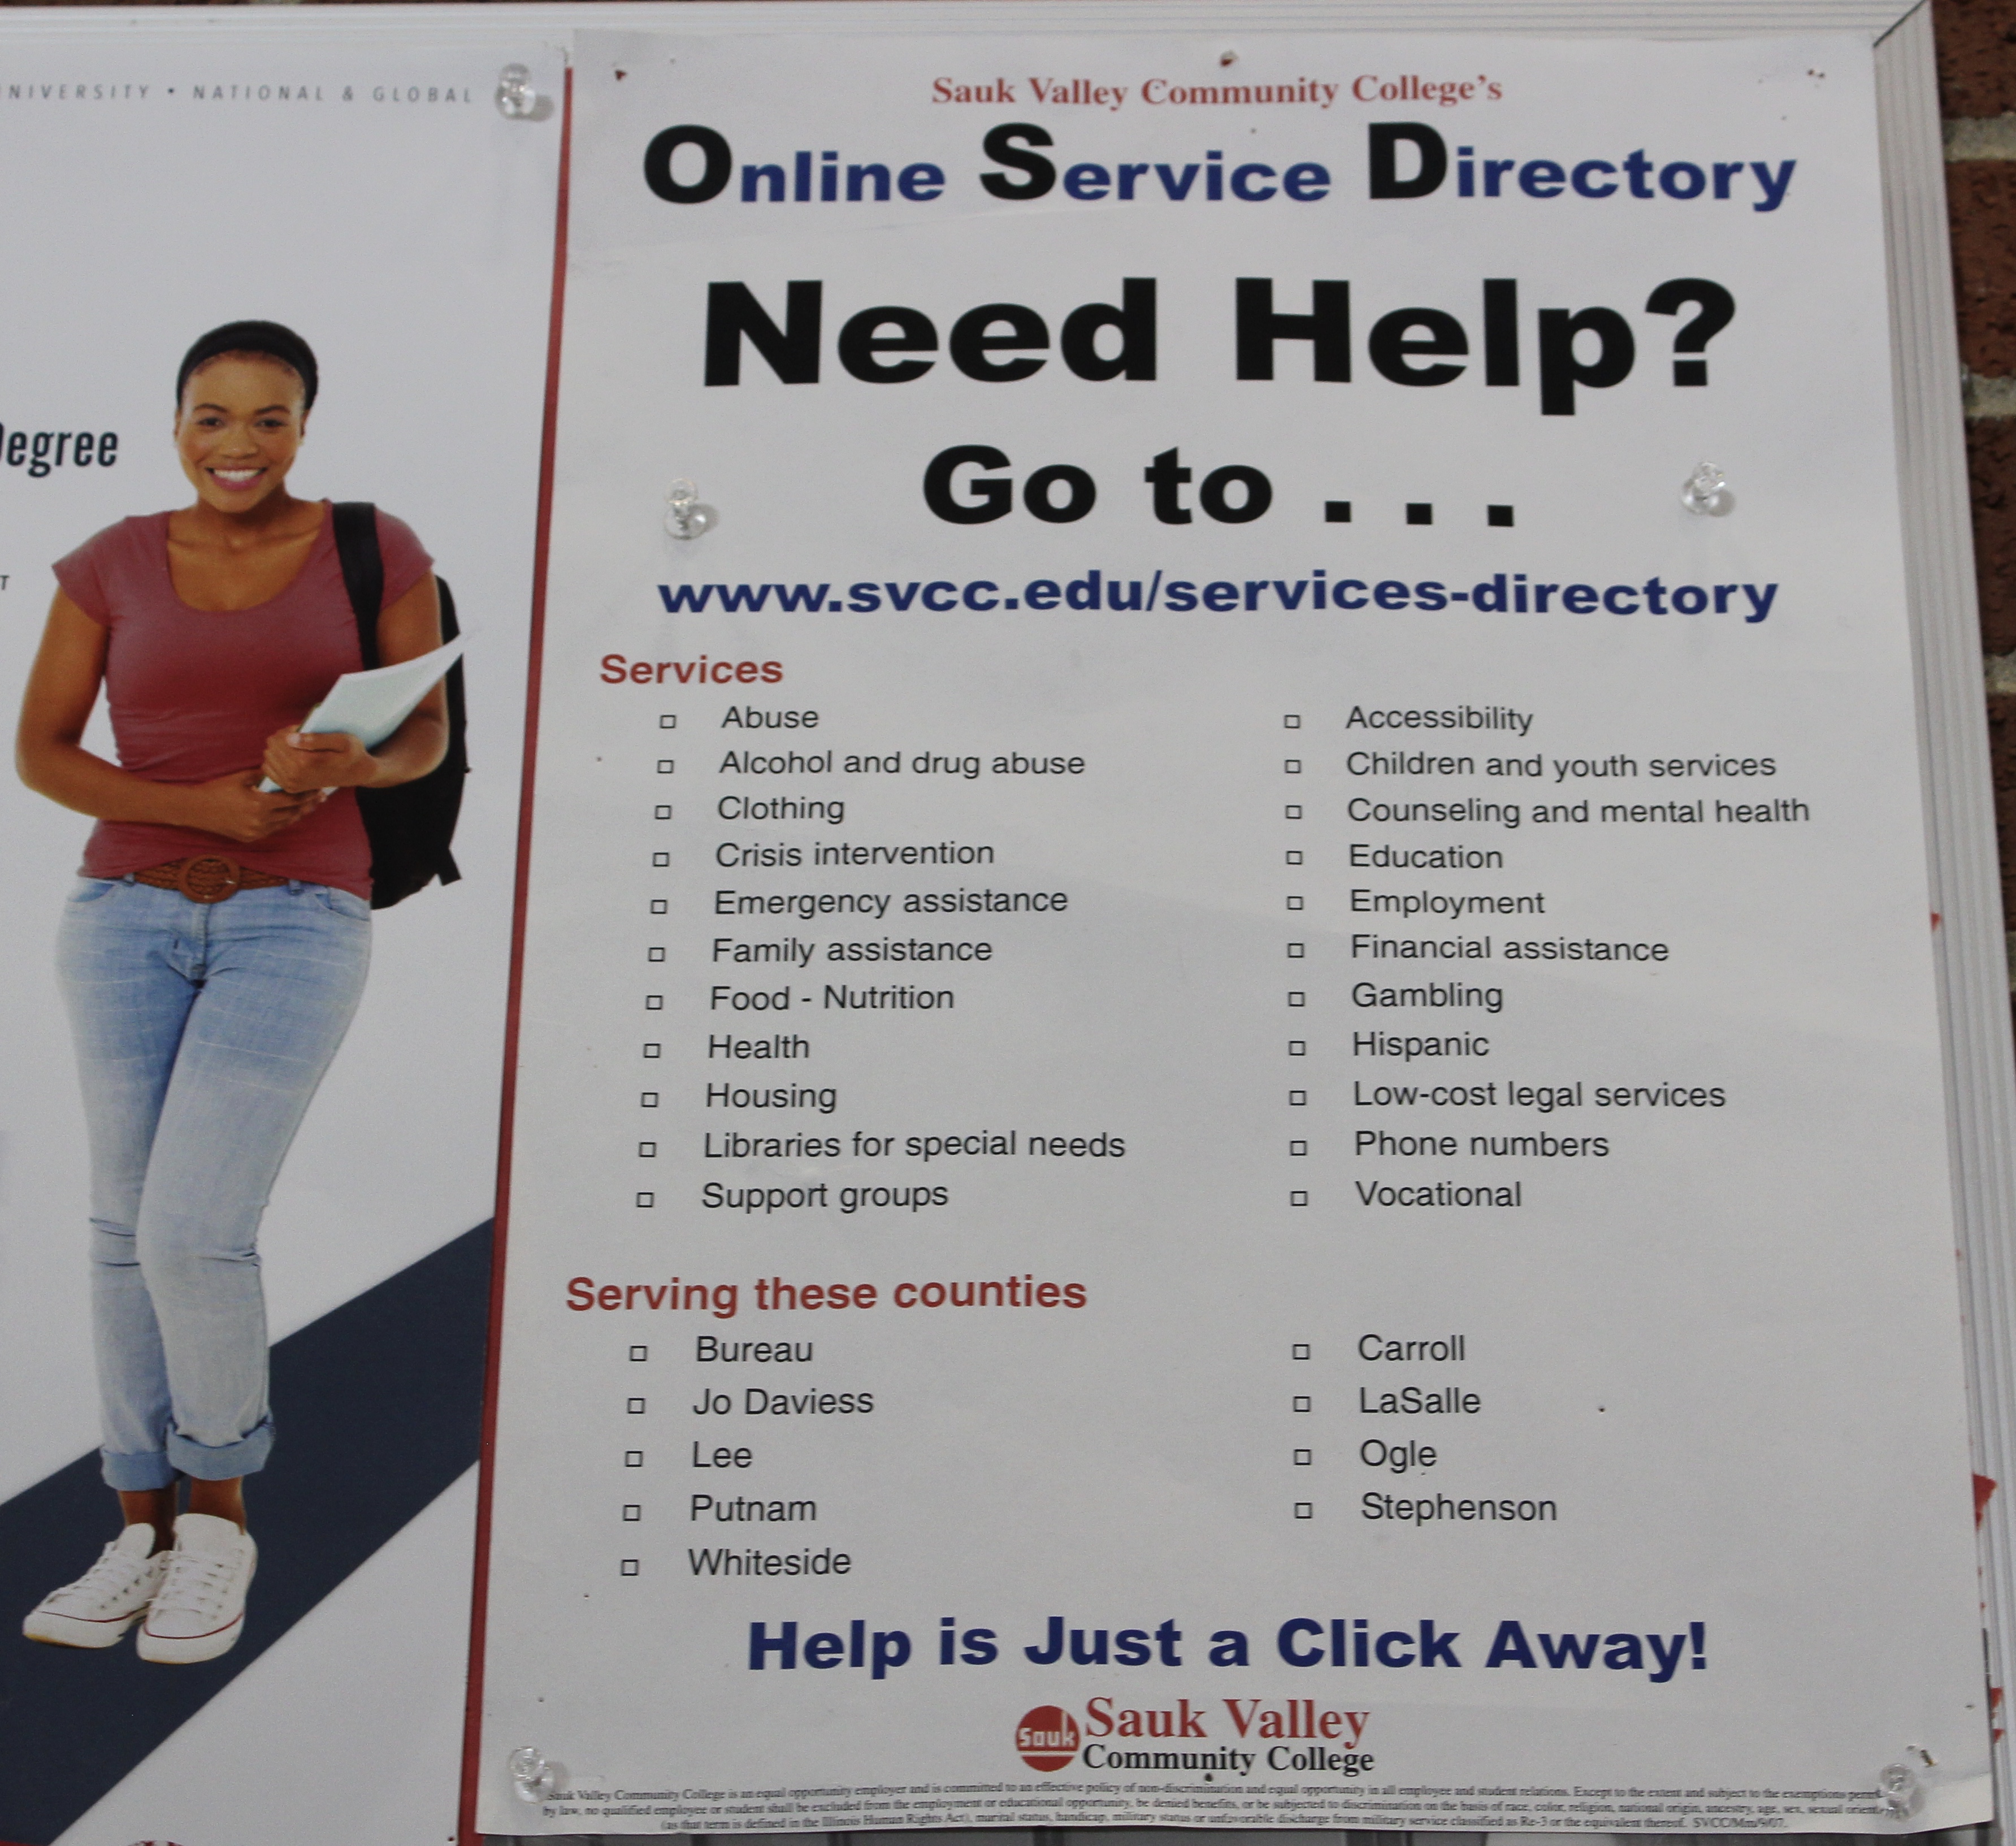 Sauk Valley Community College offers a variety of resources for students in need.